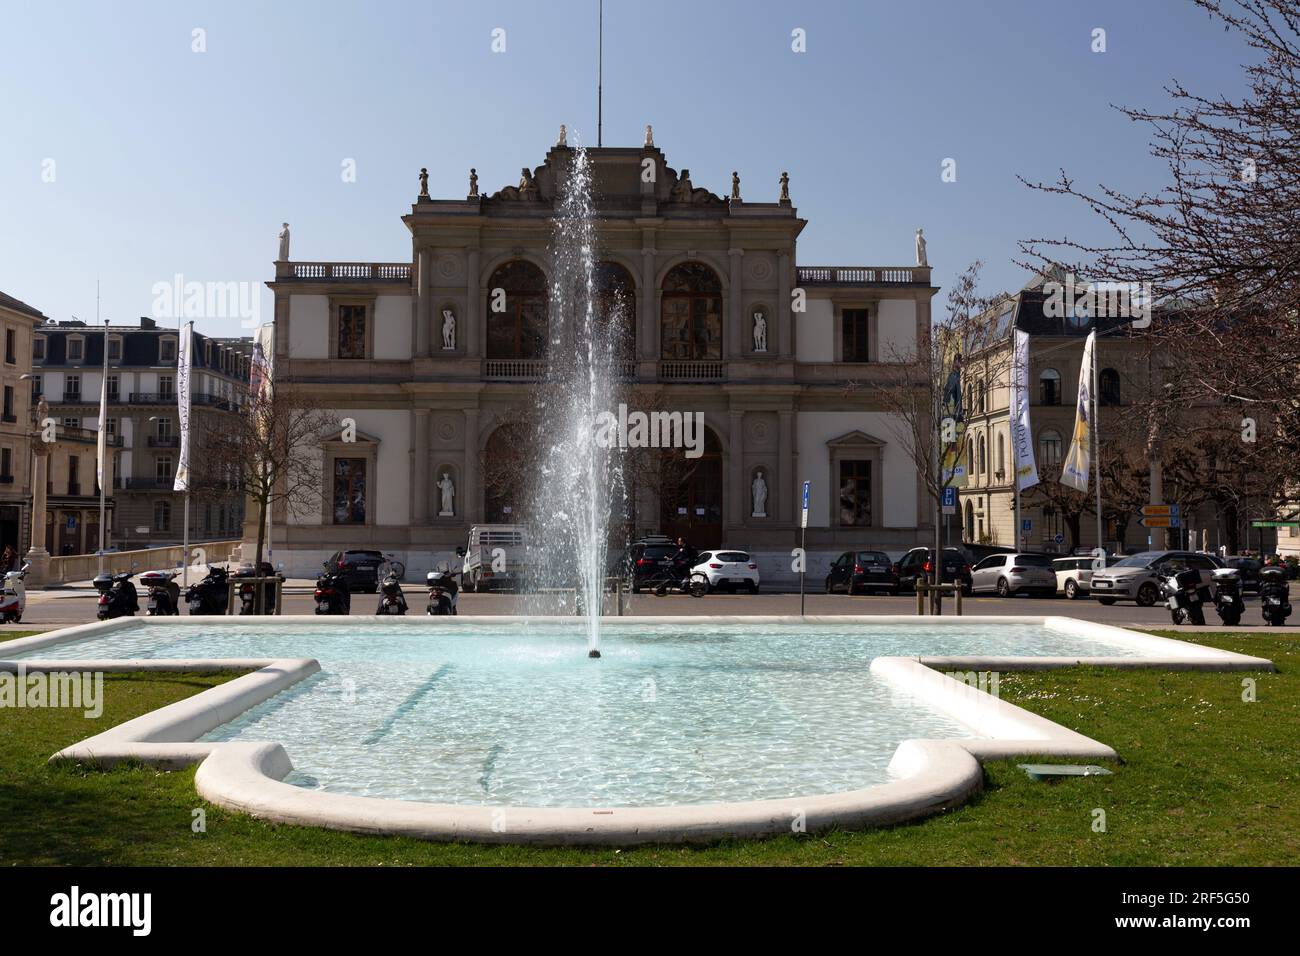 Geneva, Switzerland - 25 March 2022: Place Neuve is one of the main squares in the city of Geneva. Its current official name is Place de Neuve, named Stock Photo